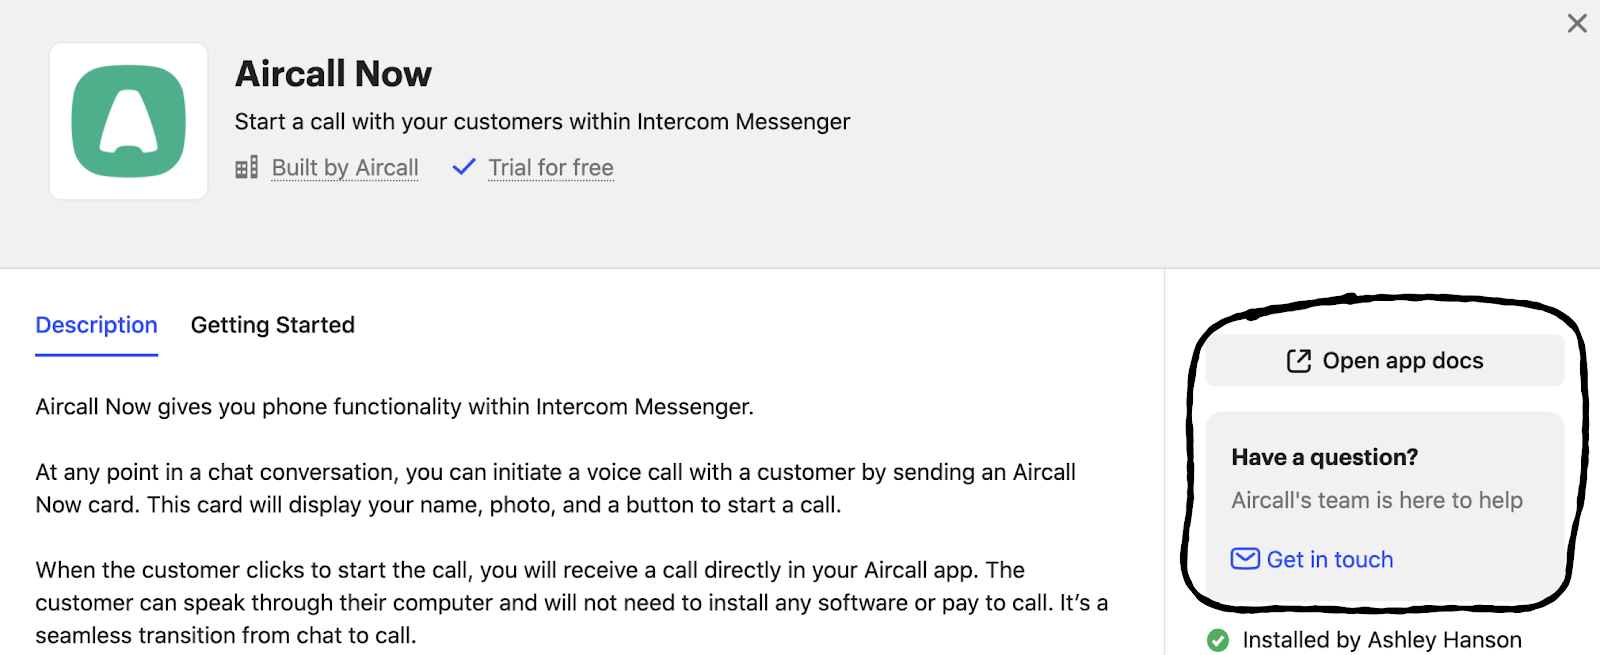 Aircall support